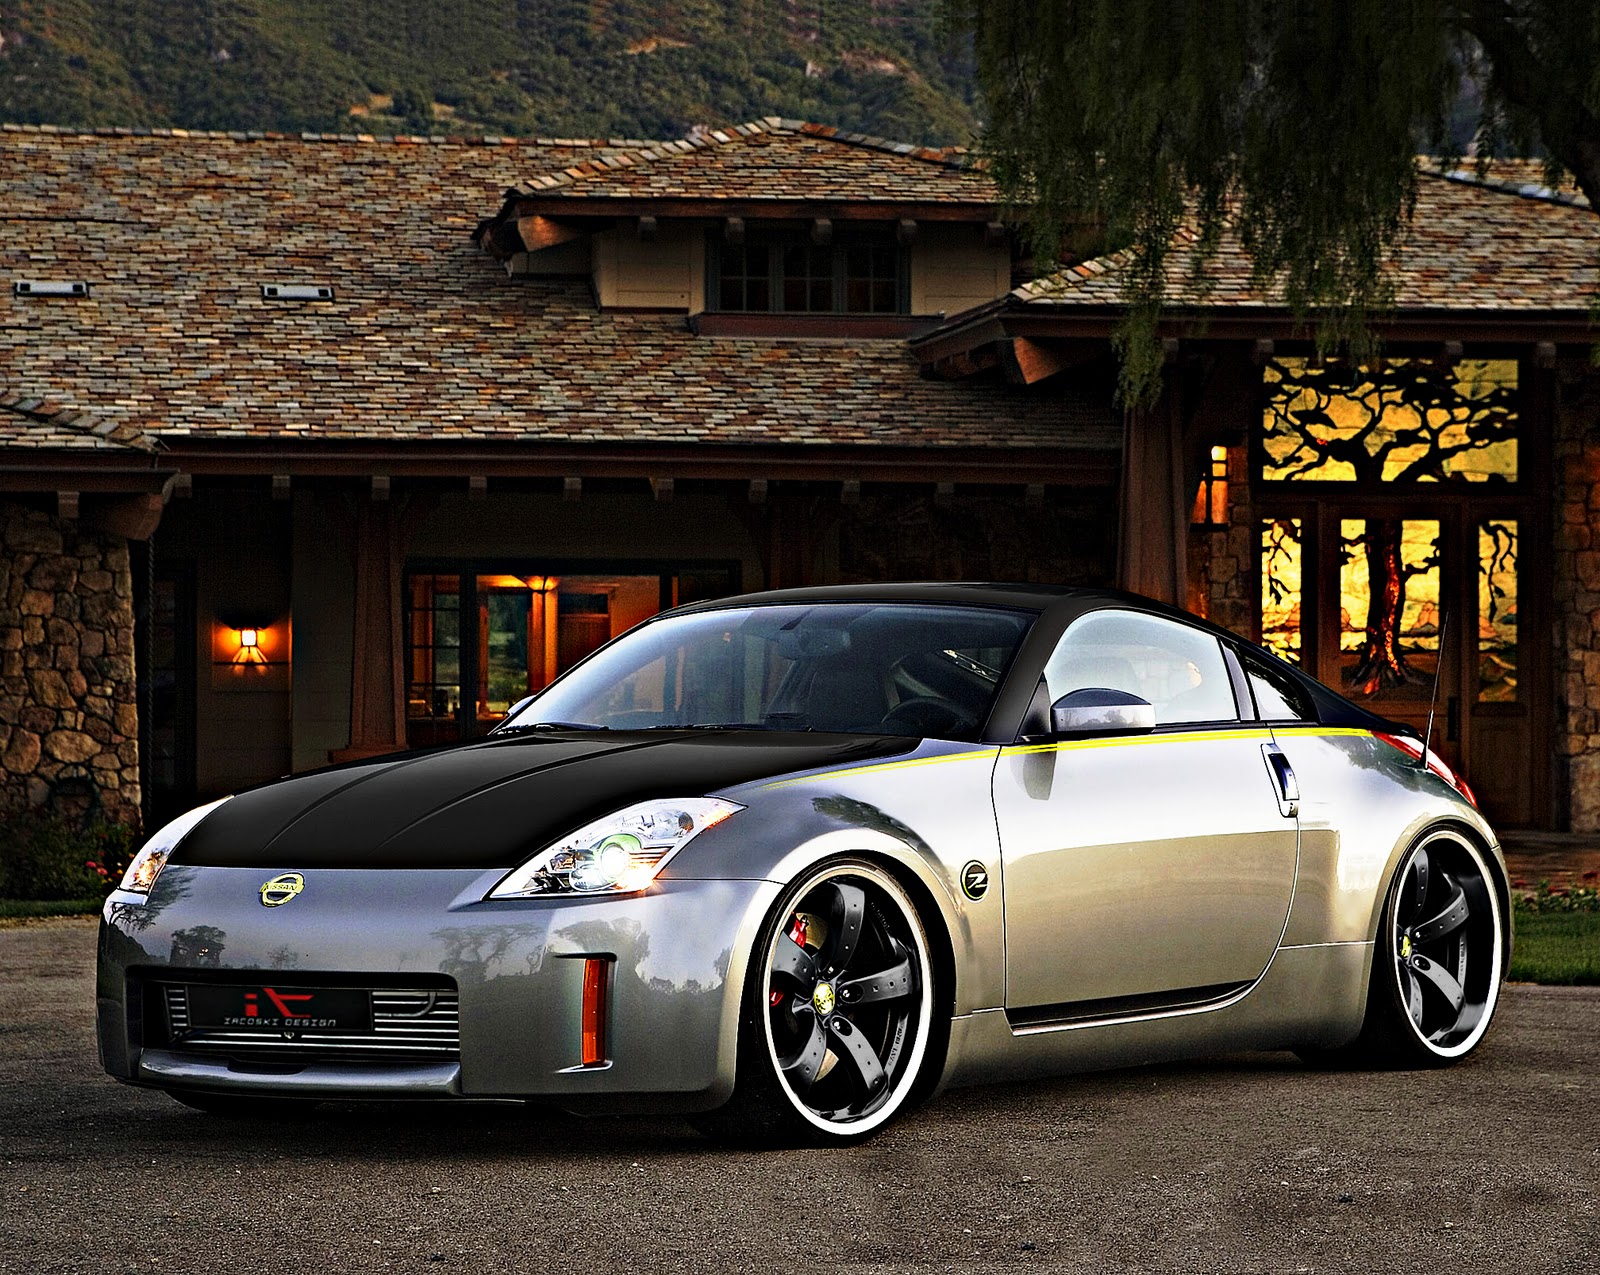  to match my points 350Z pretty good wallpaper size too   Wallpapers